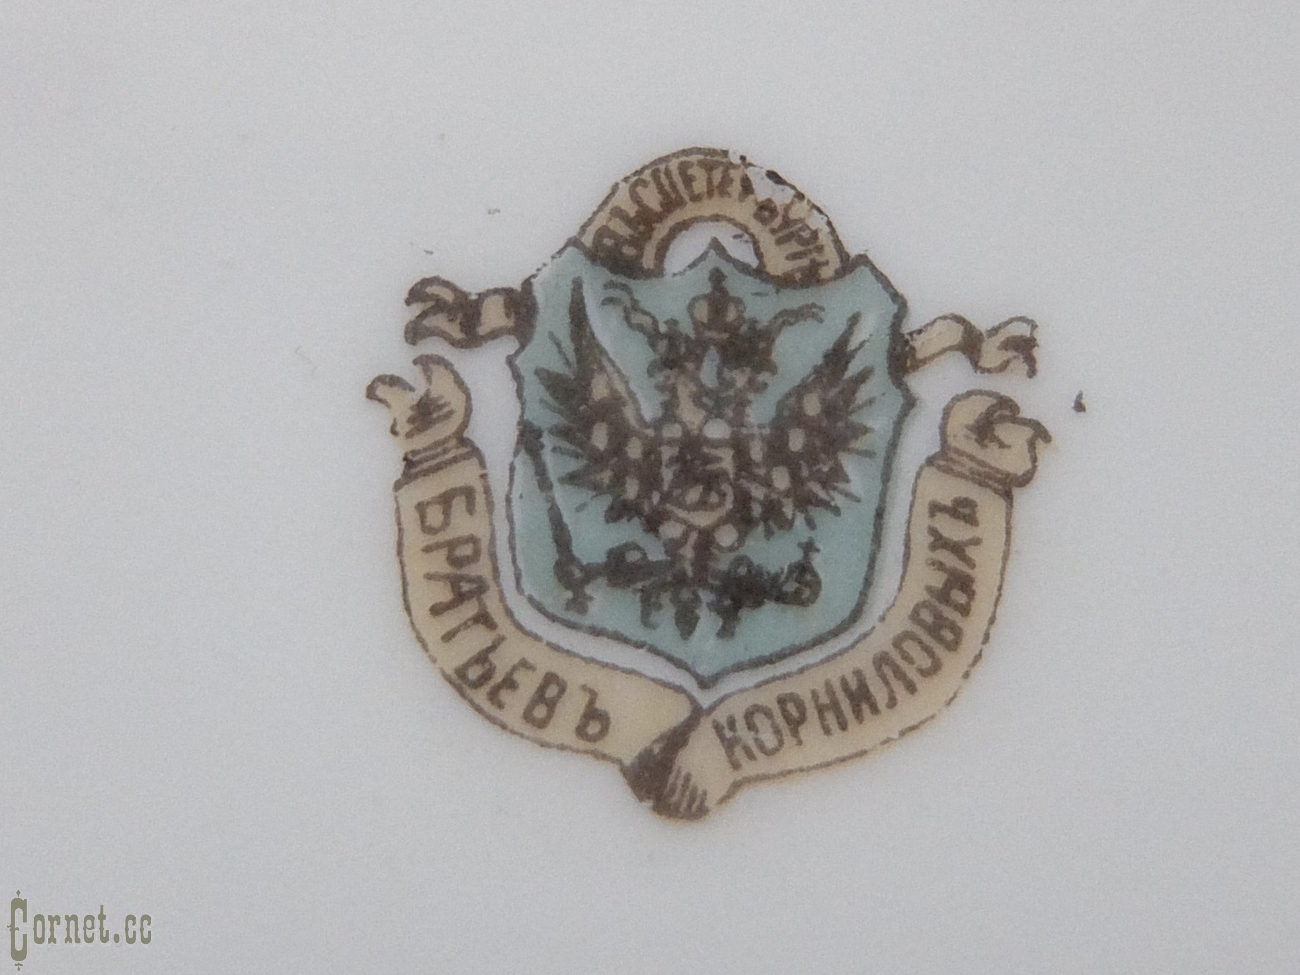 Plate from the officers ' collection of the 5th Finnish Rifle Regiment